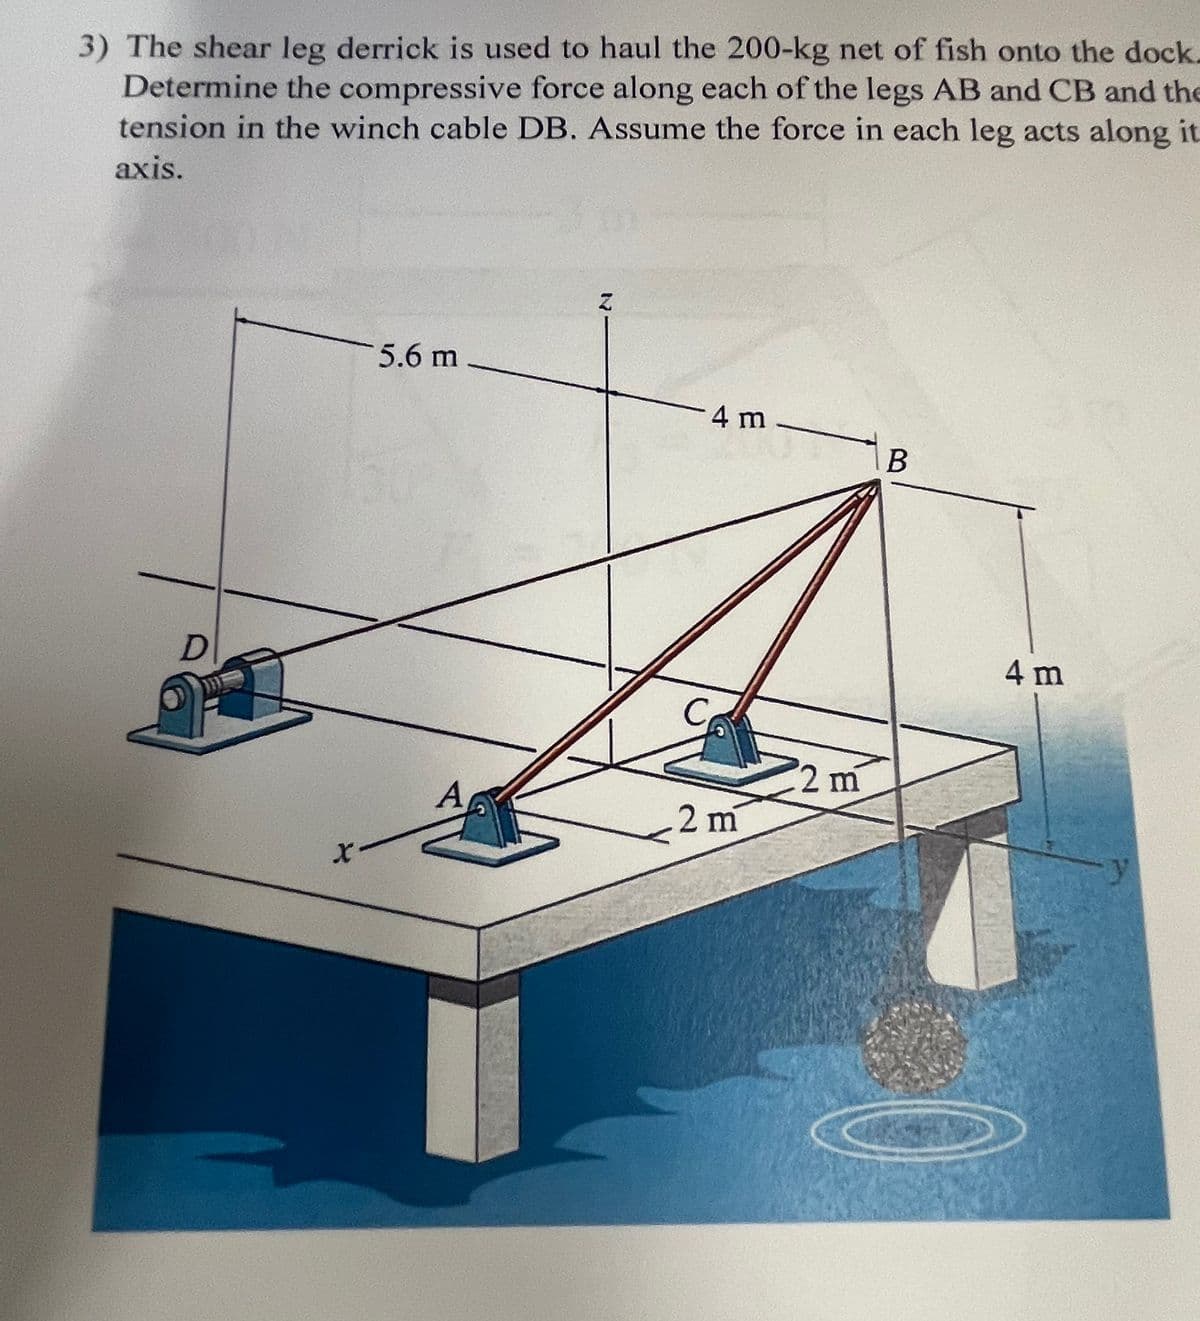 3) The shear leg derrick is used to haul the 200-kg net of fish onto the dock.
Determine the compressive force along each of the legs AB and CB and the
tension in the winch cable DB. Assume the force in each leg acts along it
axis.
D
5.6 m
4 m
B
$2 m
A
2 m
4 m